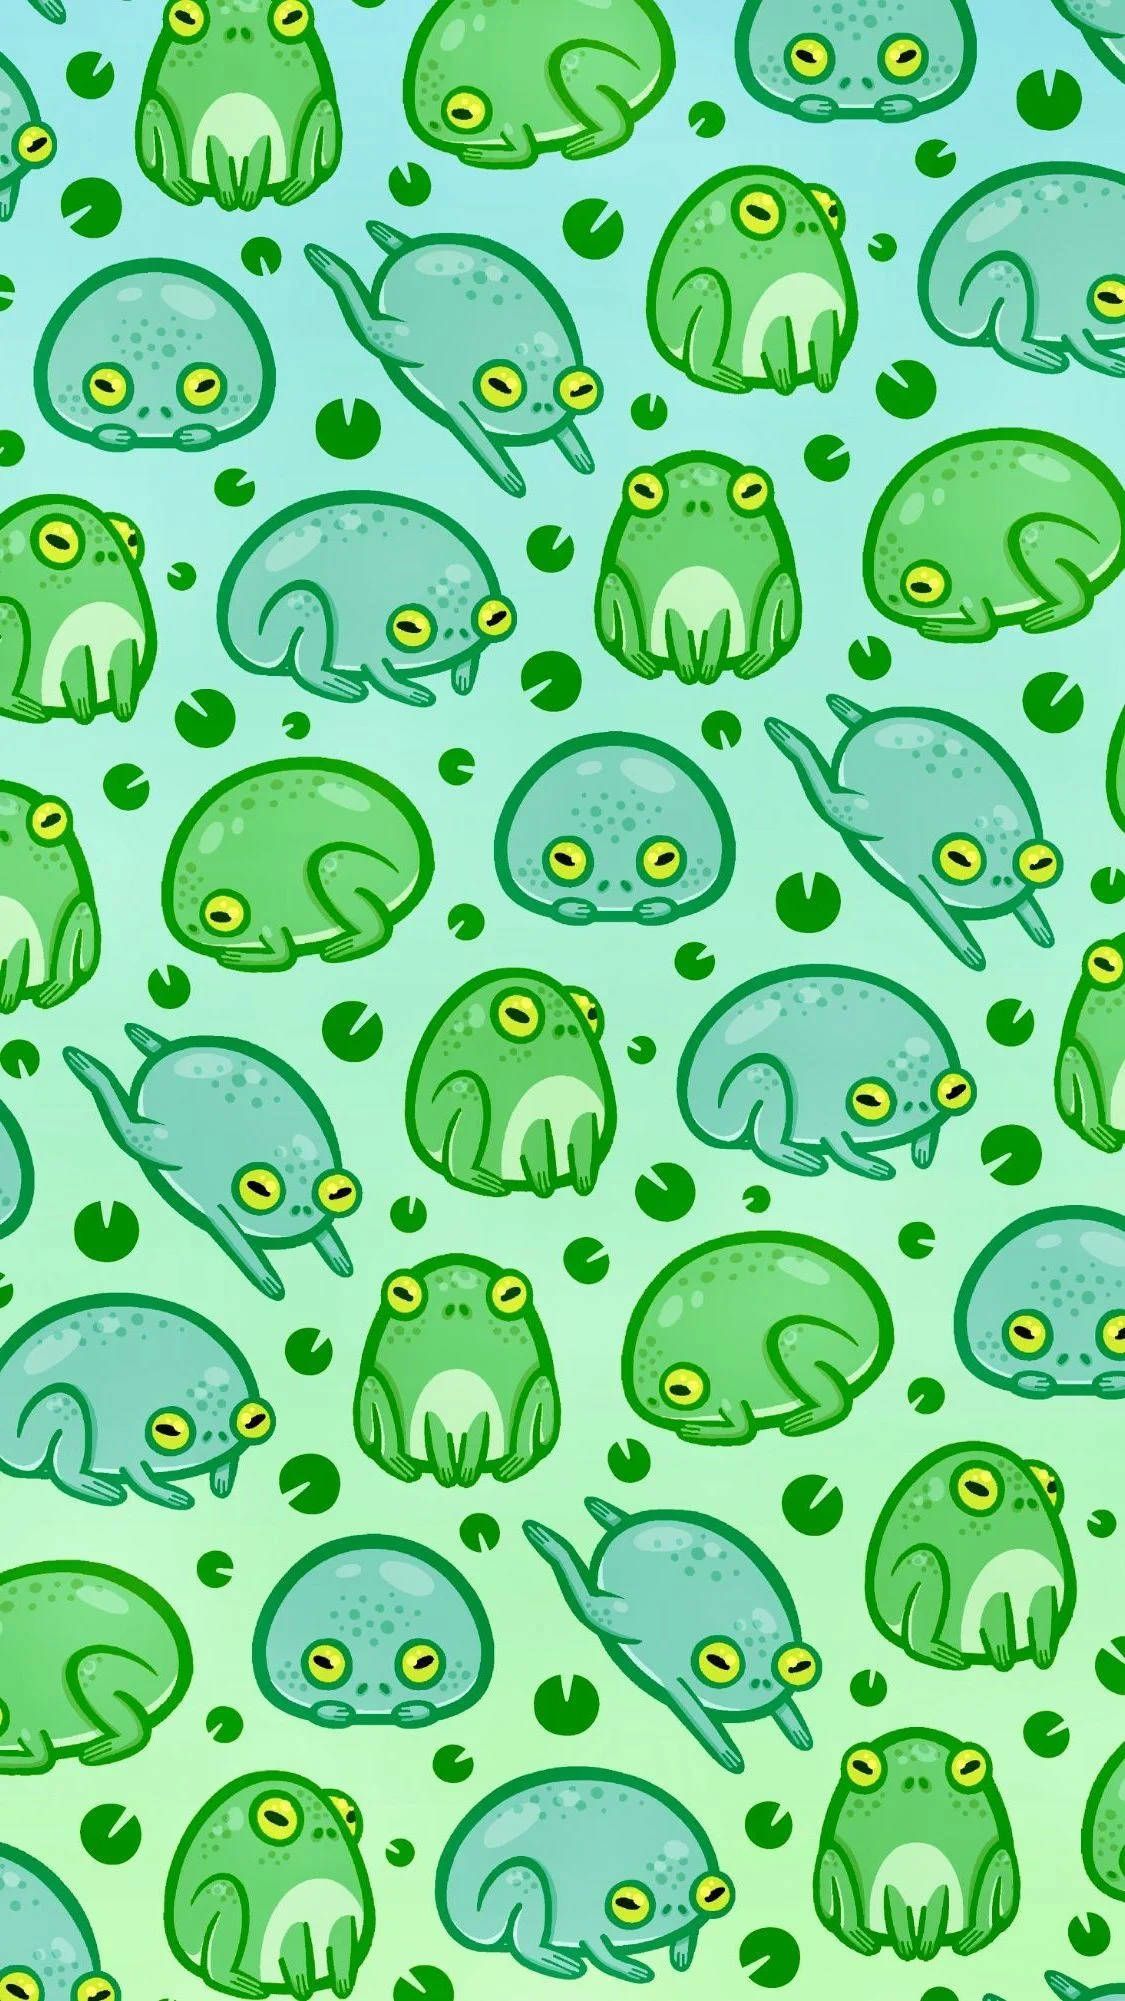 Iphone wallpaper with frogs - Frog